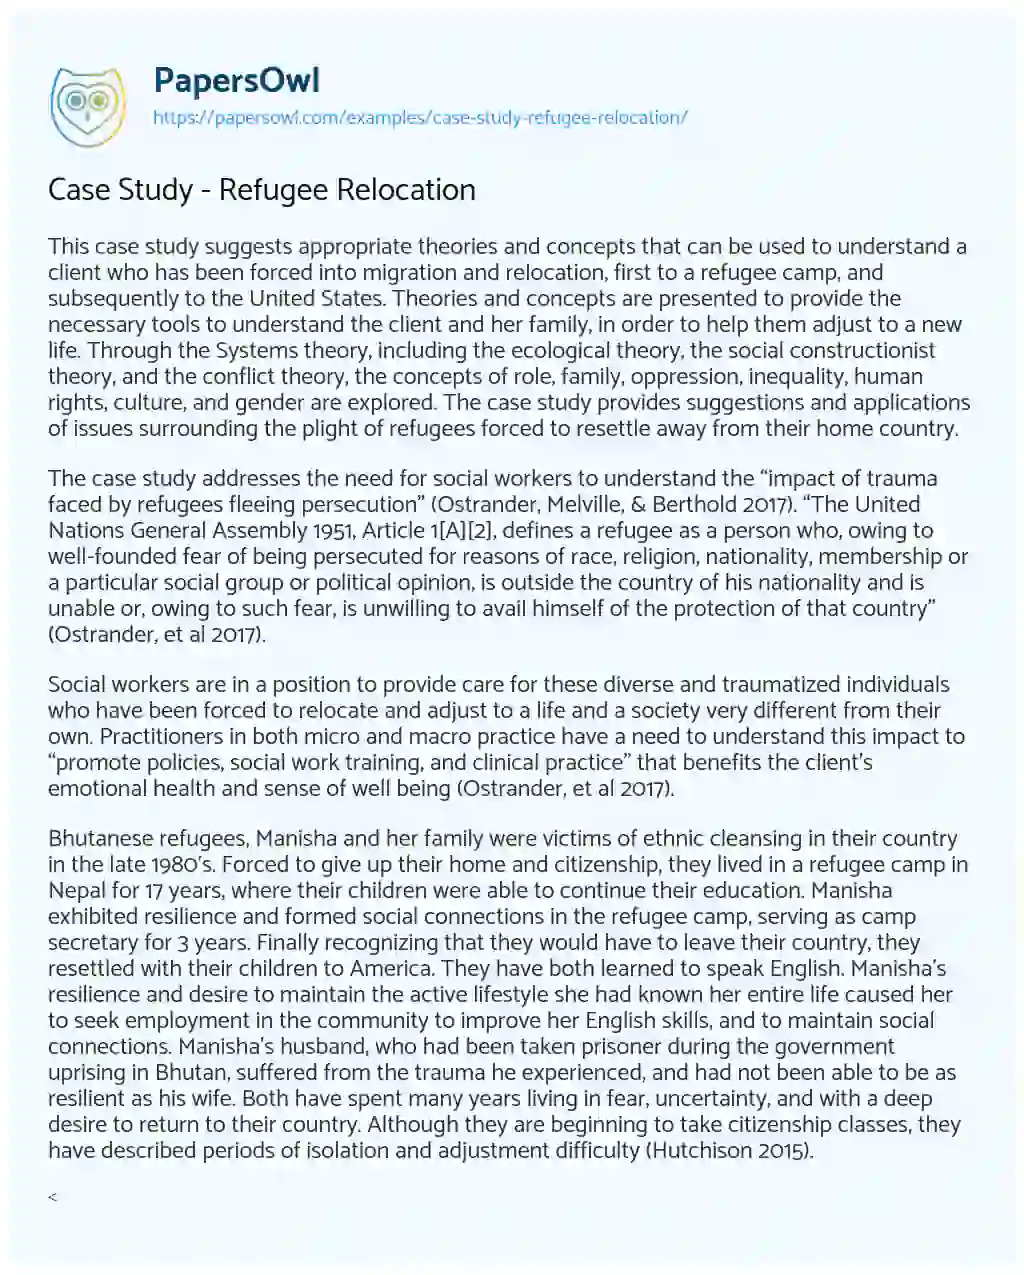 Essay on Case Study – Refugee Relocation